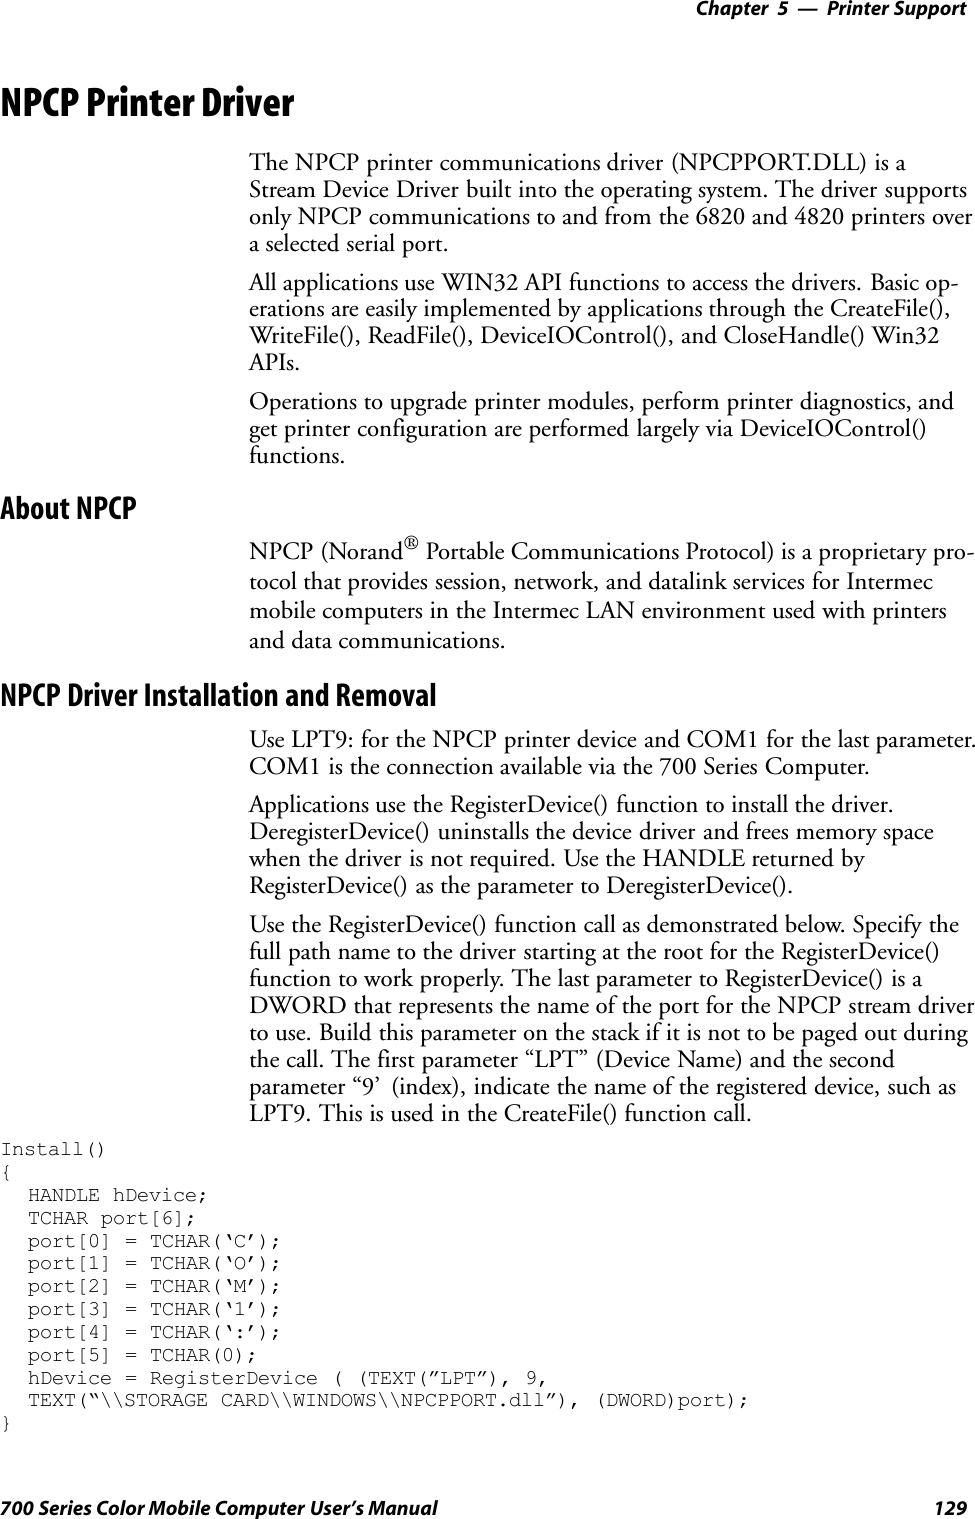 Printer Support—Chapter 5129700 Series Color Mobile Computer User’s ManualNPCP Printer DriverThe NPCP printer communications driver (NPCPPORT.DLL) is aStream Device Driver built into the operating system. The driver supportsonly NPCP communications to and from the 6820 and 4820 printers overa selected serial port.All applications use WIN32 API functions to access the drivers. Basic op-erations are easily implemented by applications through the CreateFile(),WriteFile(), ReadFile(), DeviceIOControl(), and CloseHandle() Win32APIs.Operations to upgrade printer modules, perform printer diagnostics, andget printer configuration are performed largely via DeviceIOControl()functions.About NPCPNPCP (NorandPortable Communications Protocol) is a proprietary pro-tocol that provides session, network, and datalink services for Intermecmobile computers in the Intermec LAN environment used with printersand data communications.NPCP Driver Installation and RemovalUse LPT9: for the NPCP printer device and COM1 for the last parameter.COM1 is the connection available via the 700 Series Computer.Applications use the RegisterDevice() function to install the driver.DeregisterDevice() uninstalls the device driver and frees memory spacewhen the driver is not required. Use the HANDLE returned byRegisterDevice() as the parameter to DeregisterDevice().Use the RegisterDevice() function call as demonstrated below. Specify thefull path name to the driver starting at the root for the RegisterDevice()function to work properly. The last parameter to RegisterDevice() is aDWORD that represents the name of the port for the NPCP stream driverto use. Build this parameter on the stack if it is not to be paged out duringthe call. The first parameter “LPT” (Device Name) and the secondparameter “9’ (index), indicate the name of the registered device, such asLPT9. This is used in the CreateFile() function call.Install(){HANDLE hDevice;TCHAR port[6];port[0] = TCHAR(‘C’);port[1] = TCHAR(‘O’);port[2] = TCHAR(‘M’);port[3] = TCHAR(‘1’);port[4] = TCHAR(‘:’);port[5] = TCHAR(0);hDevice = RegisterDevice ( (TEXT(”LPT”), 9,TEXT(“\\STORAGE CARD\\WINDOWS\\NPCPPORT.dll”), (DWORD)port);}